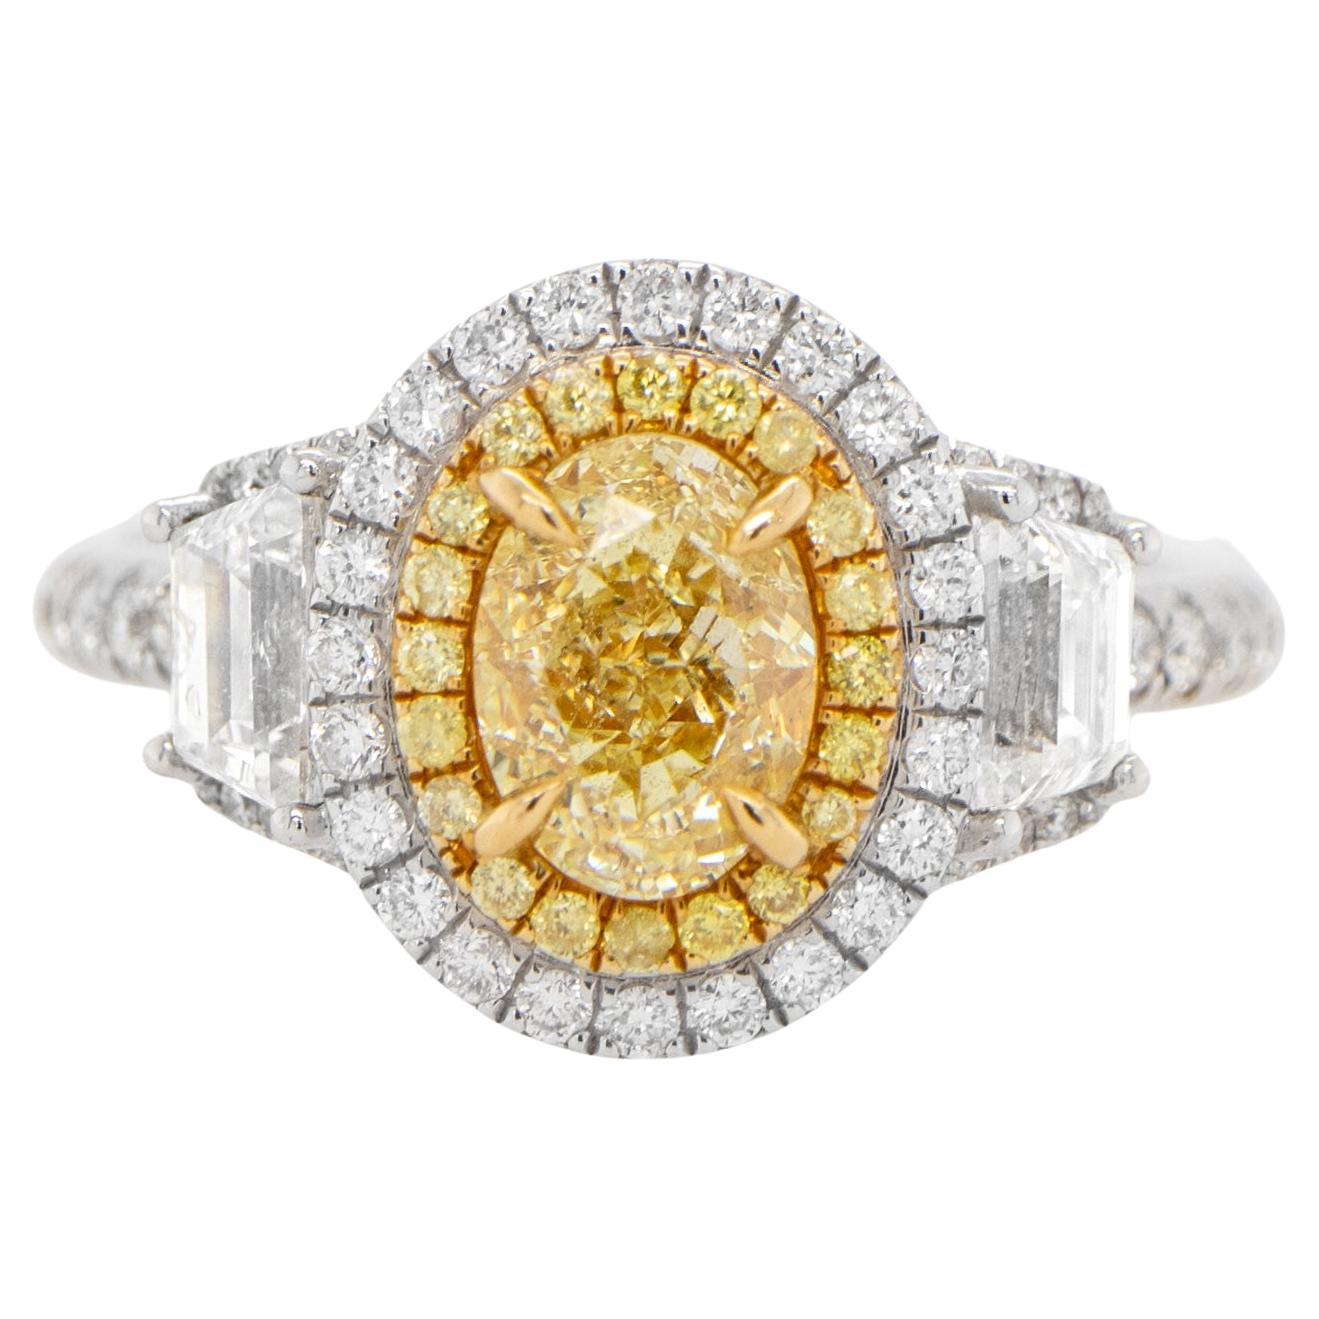 GIA Certified Natural Fancy Light Yellow Diamond Engagement Ring 2.14 Carats 18K